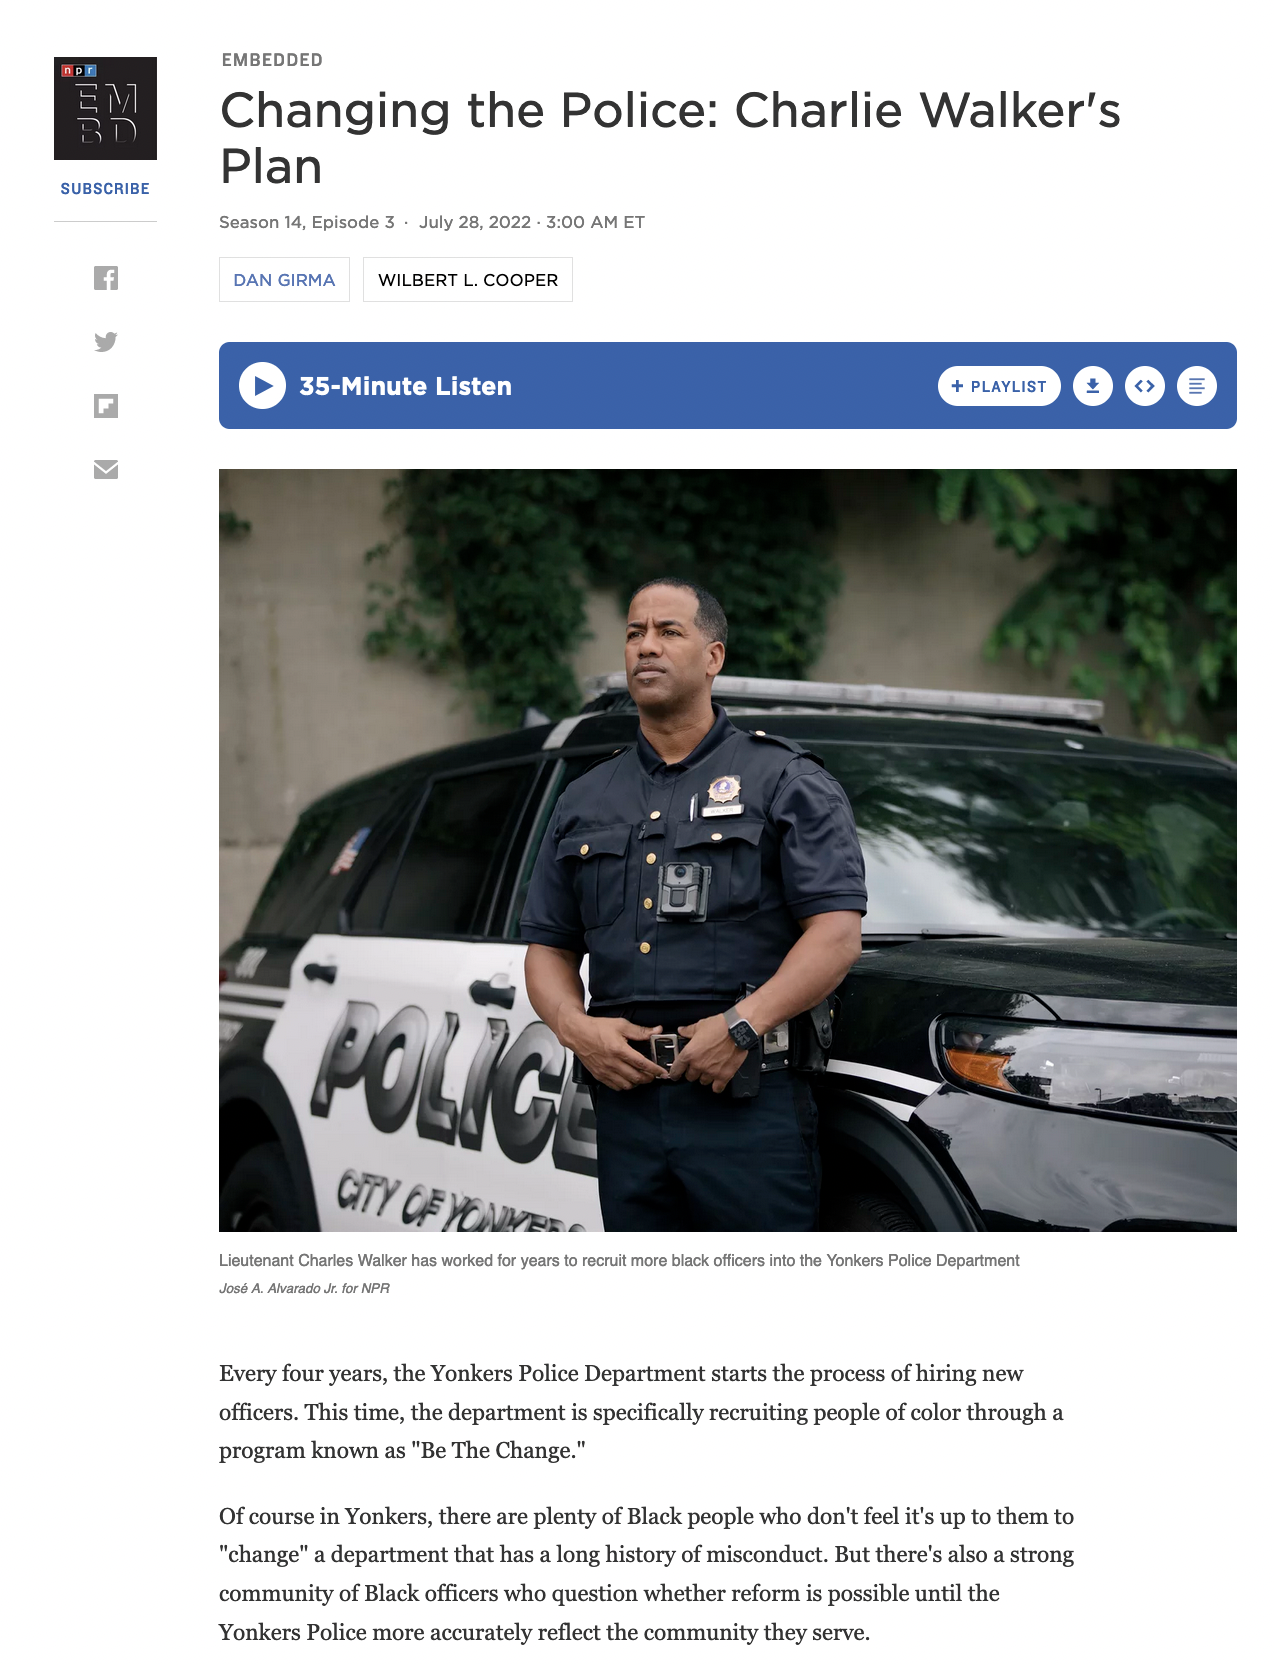 for The Marshall Project and NPR’s Embedded: Changing the Police, Charlie Walker's Plan